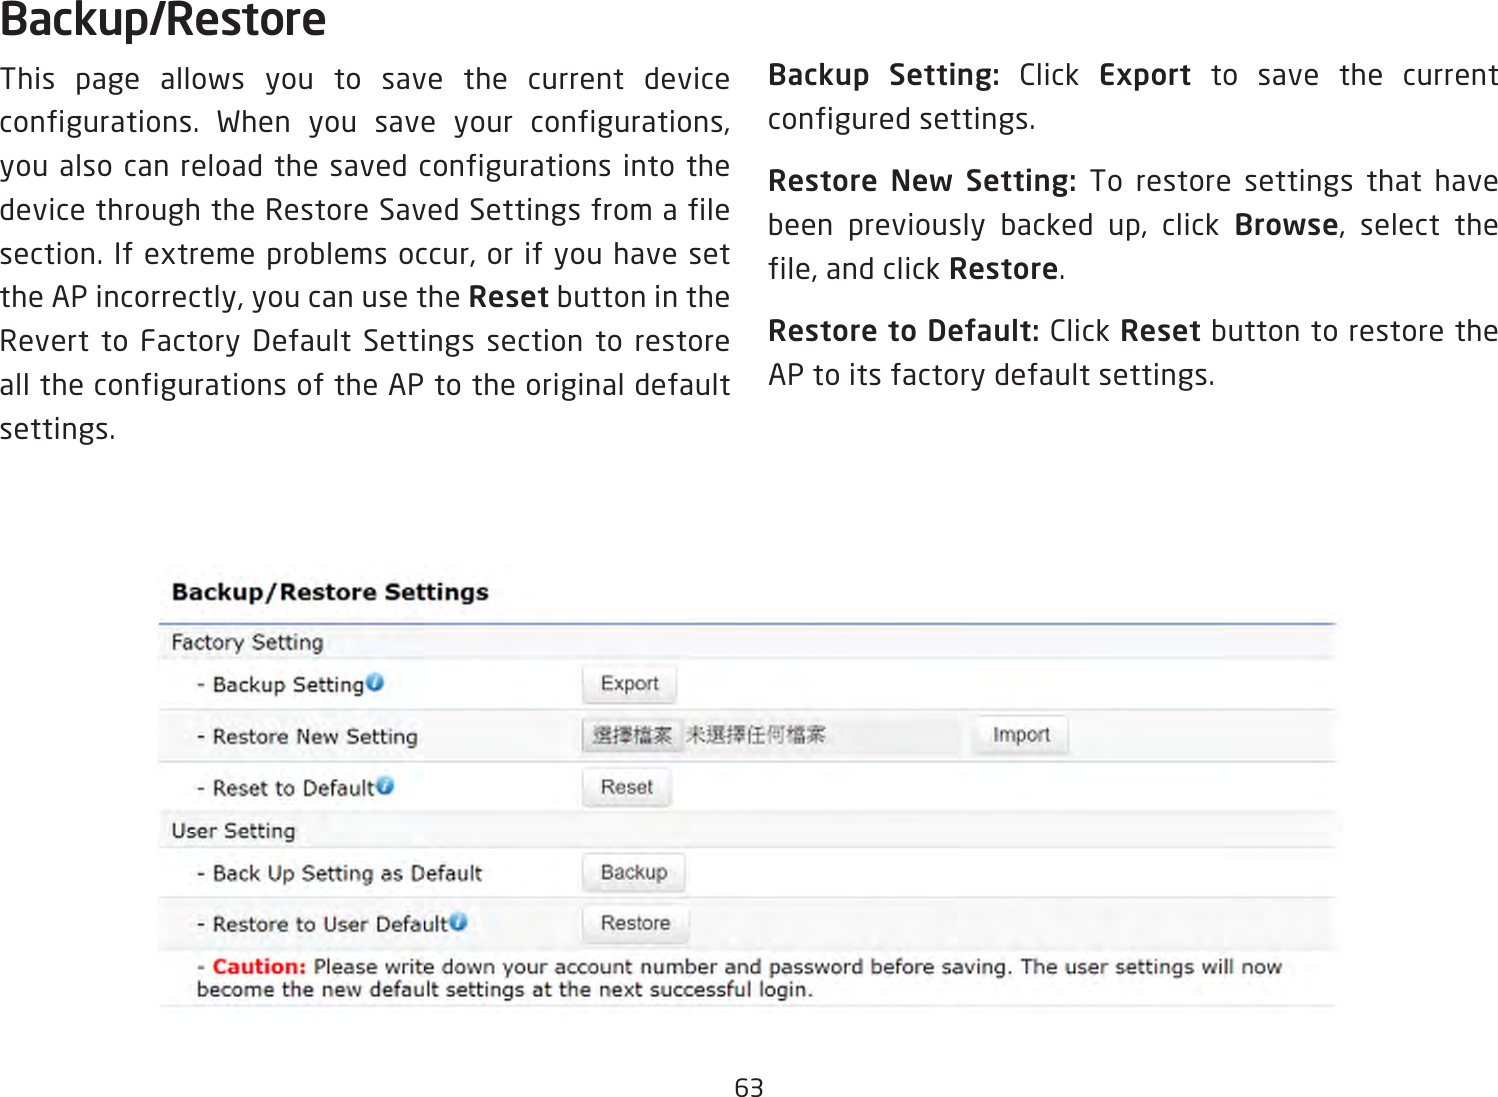 63Backup/RestoreThis page allows you to save the current device configurations. When you save your configurations, you also can reload the saved configurations into the device through the Restore Saved Settings from a file section. If extreme problems occur, or if you have set the AP incorrectly, you can use the Reset button in the Revert to Factory Default Settings section to restore all the configurations of the AP to the original default settings.Backup Setting: Click Export to save the current configured settings.Restore New Setting: To restore settings that have been previously backed up, click Browse, select the file, and click Restore.Restore to Default: Click Reset button to restore the AP to its factory default settings.